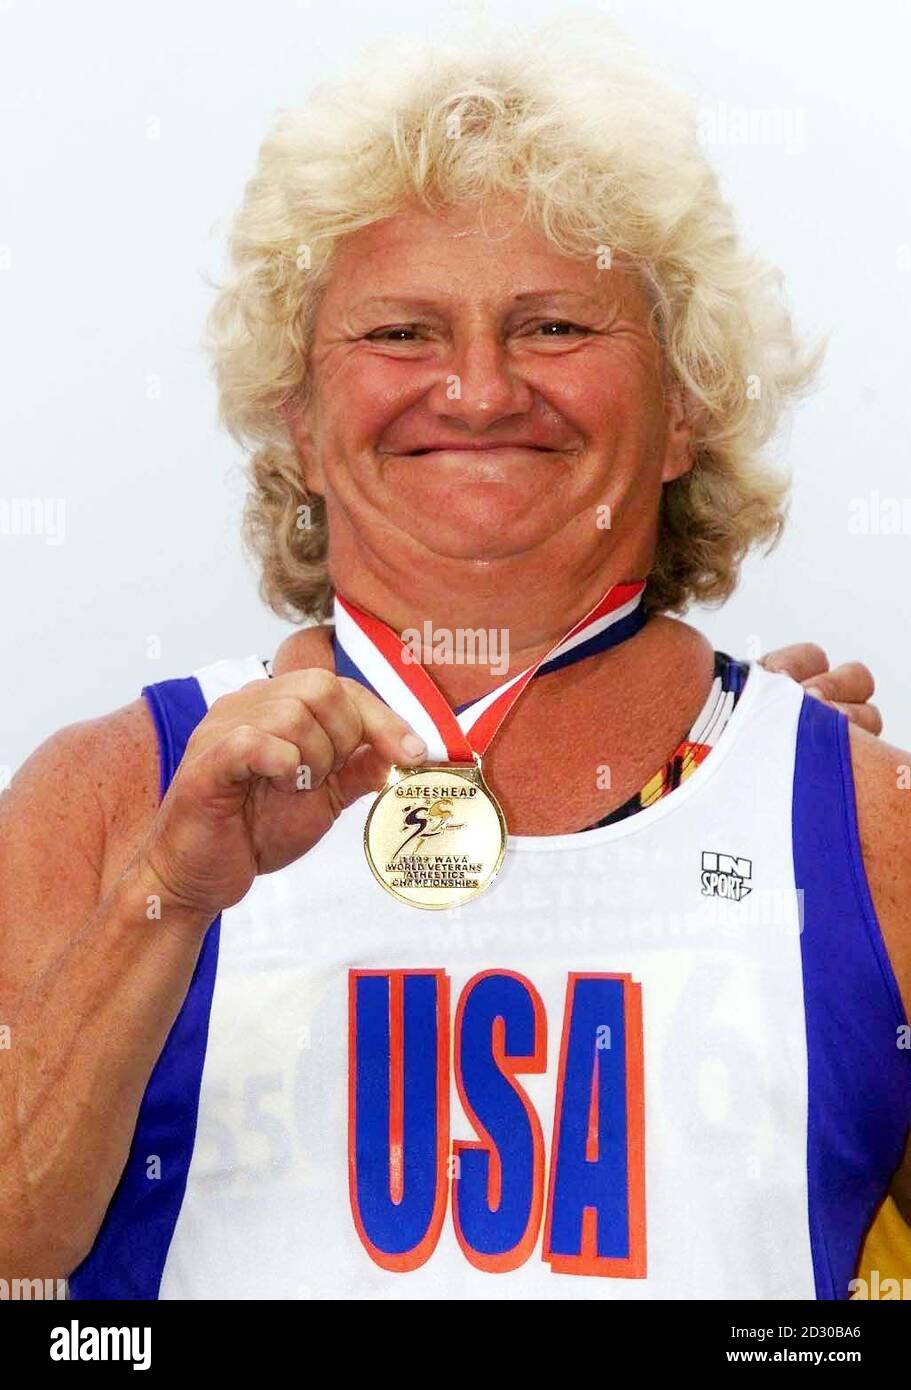 Kathleen Jager 56, USA, with her medal after winning the womans 200m  final in 28.32 seconds, a World record for her age, at the Gateshead Stadium Gateshead. She is facing allegations that she is competing in the World Veteran Games as a woman but is actually a man. Stock Photo